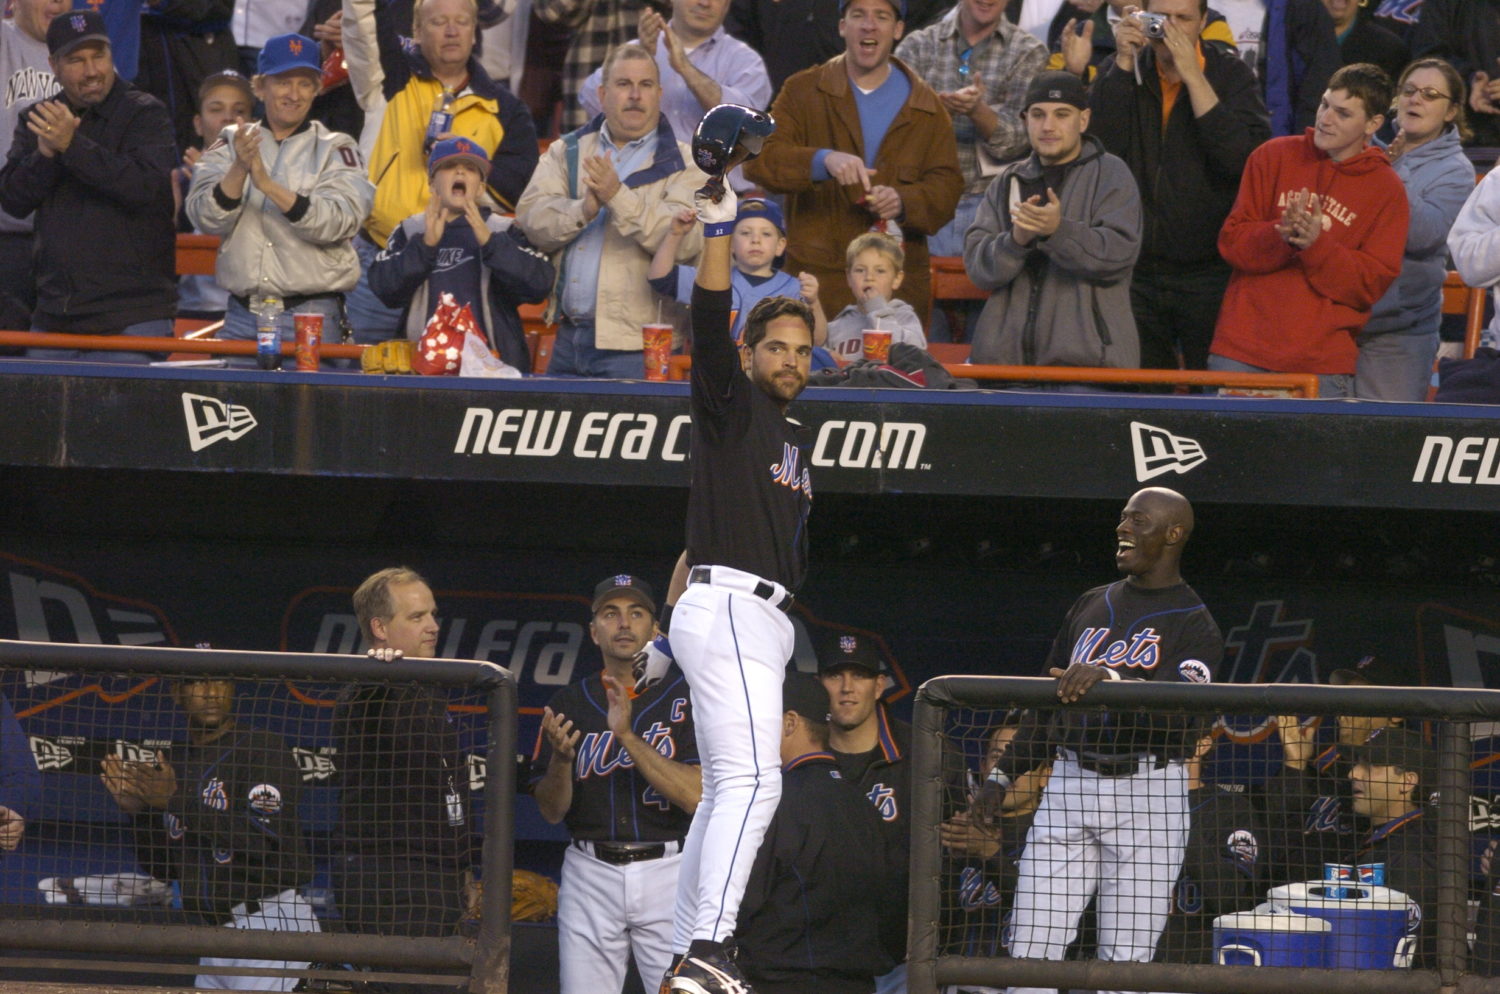 Mike Piazza Curtain Call After Home Run Record